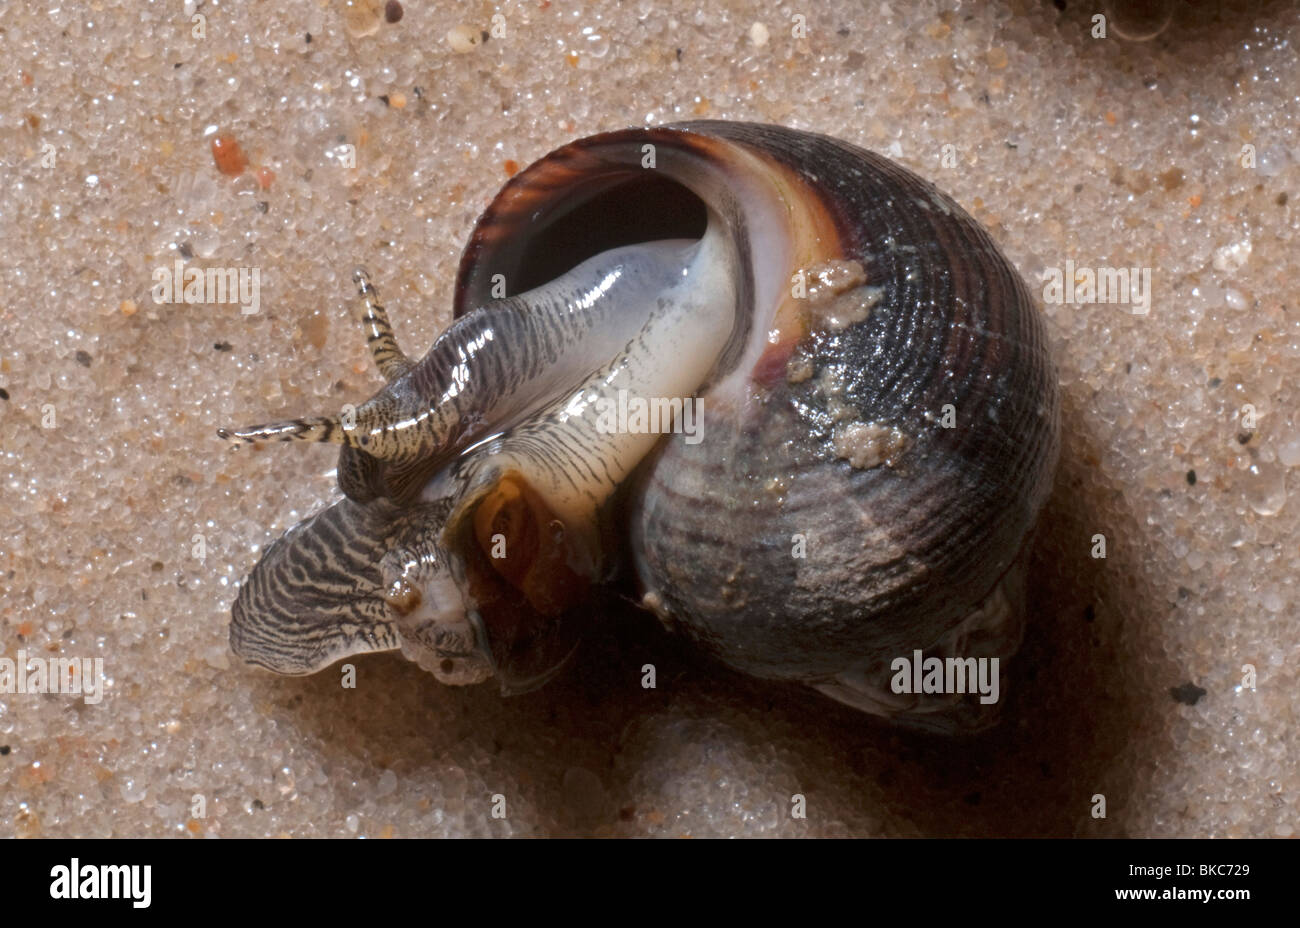 Common Periwinkle (Littorina littoralis). Animal trying to turn its shell to an upright position. Stock Photo